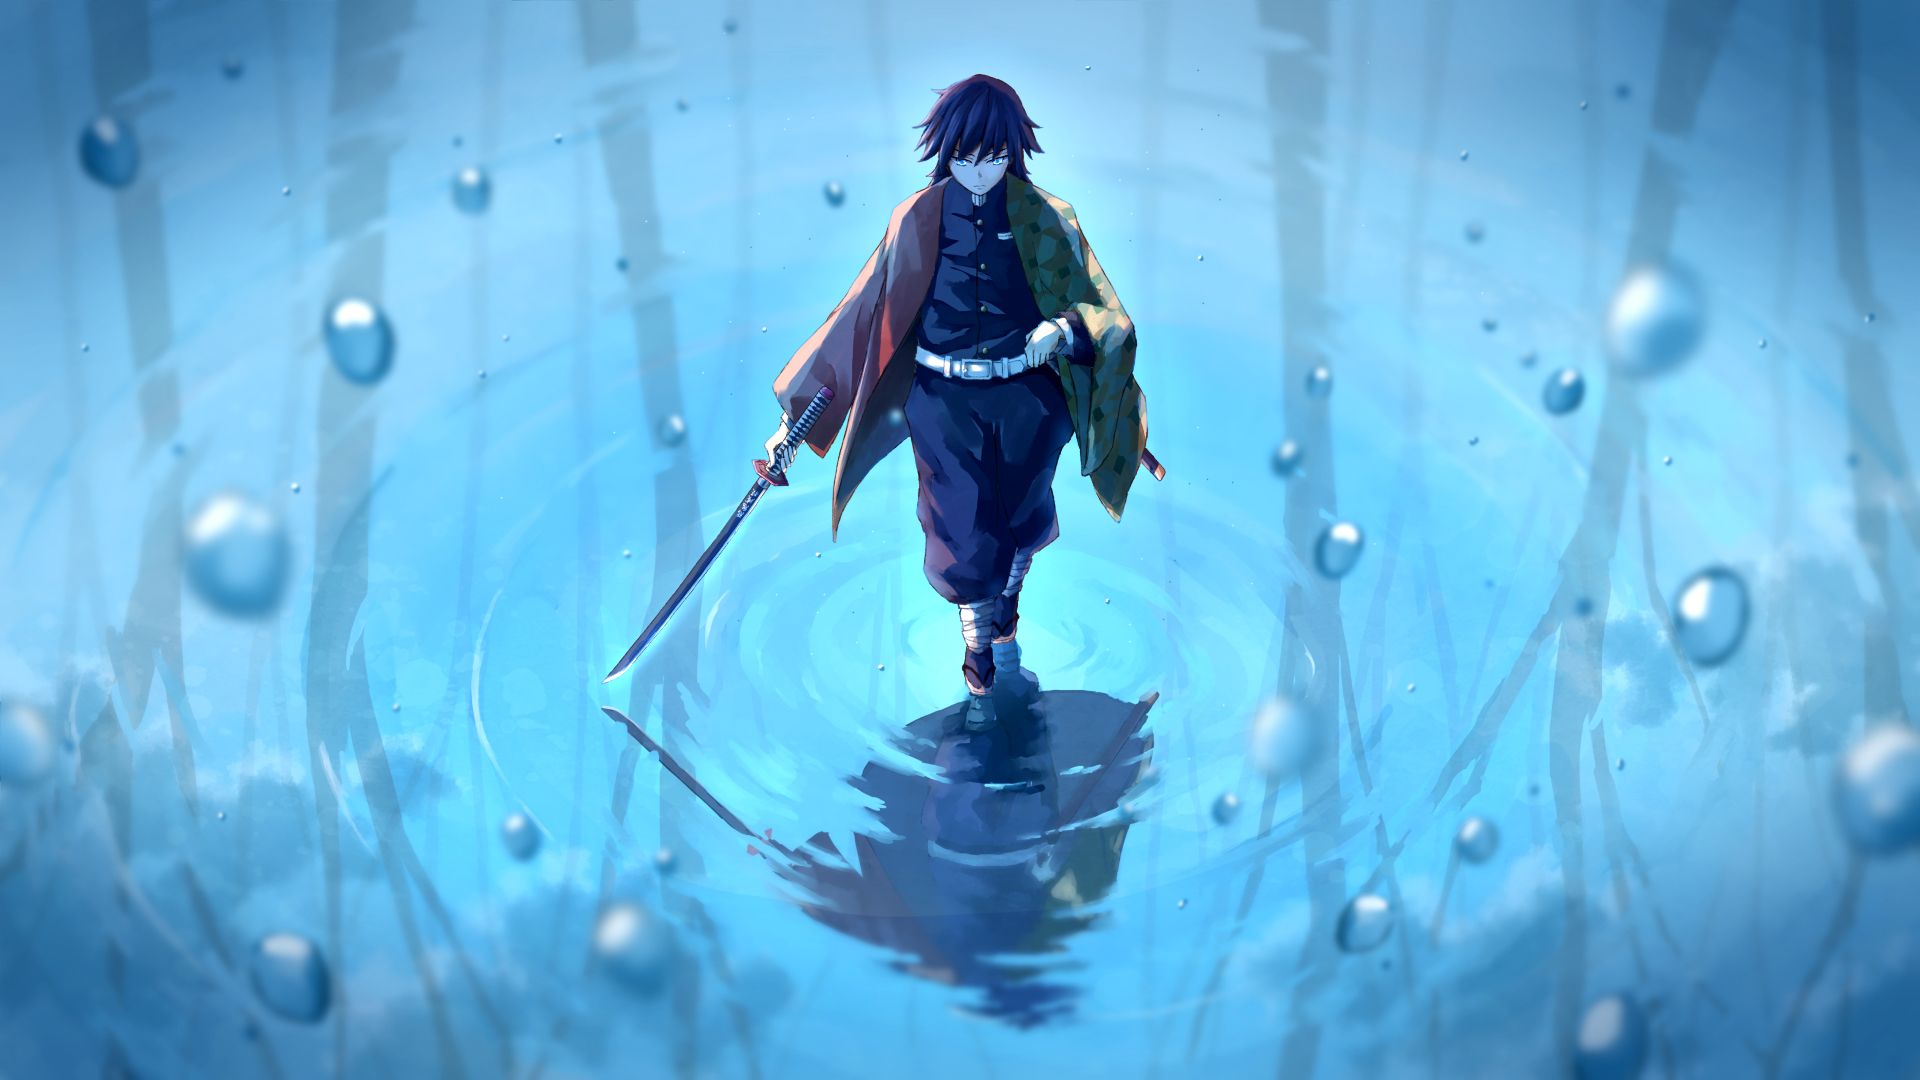 Demon Slayer Giyuu Tomioka With Sword Reflecting On Water With Background Of Blue Water And Bubbles HD Anime Wallpaper